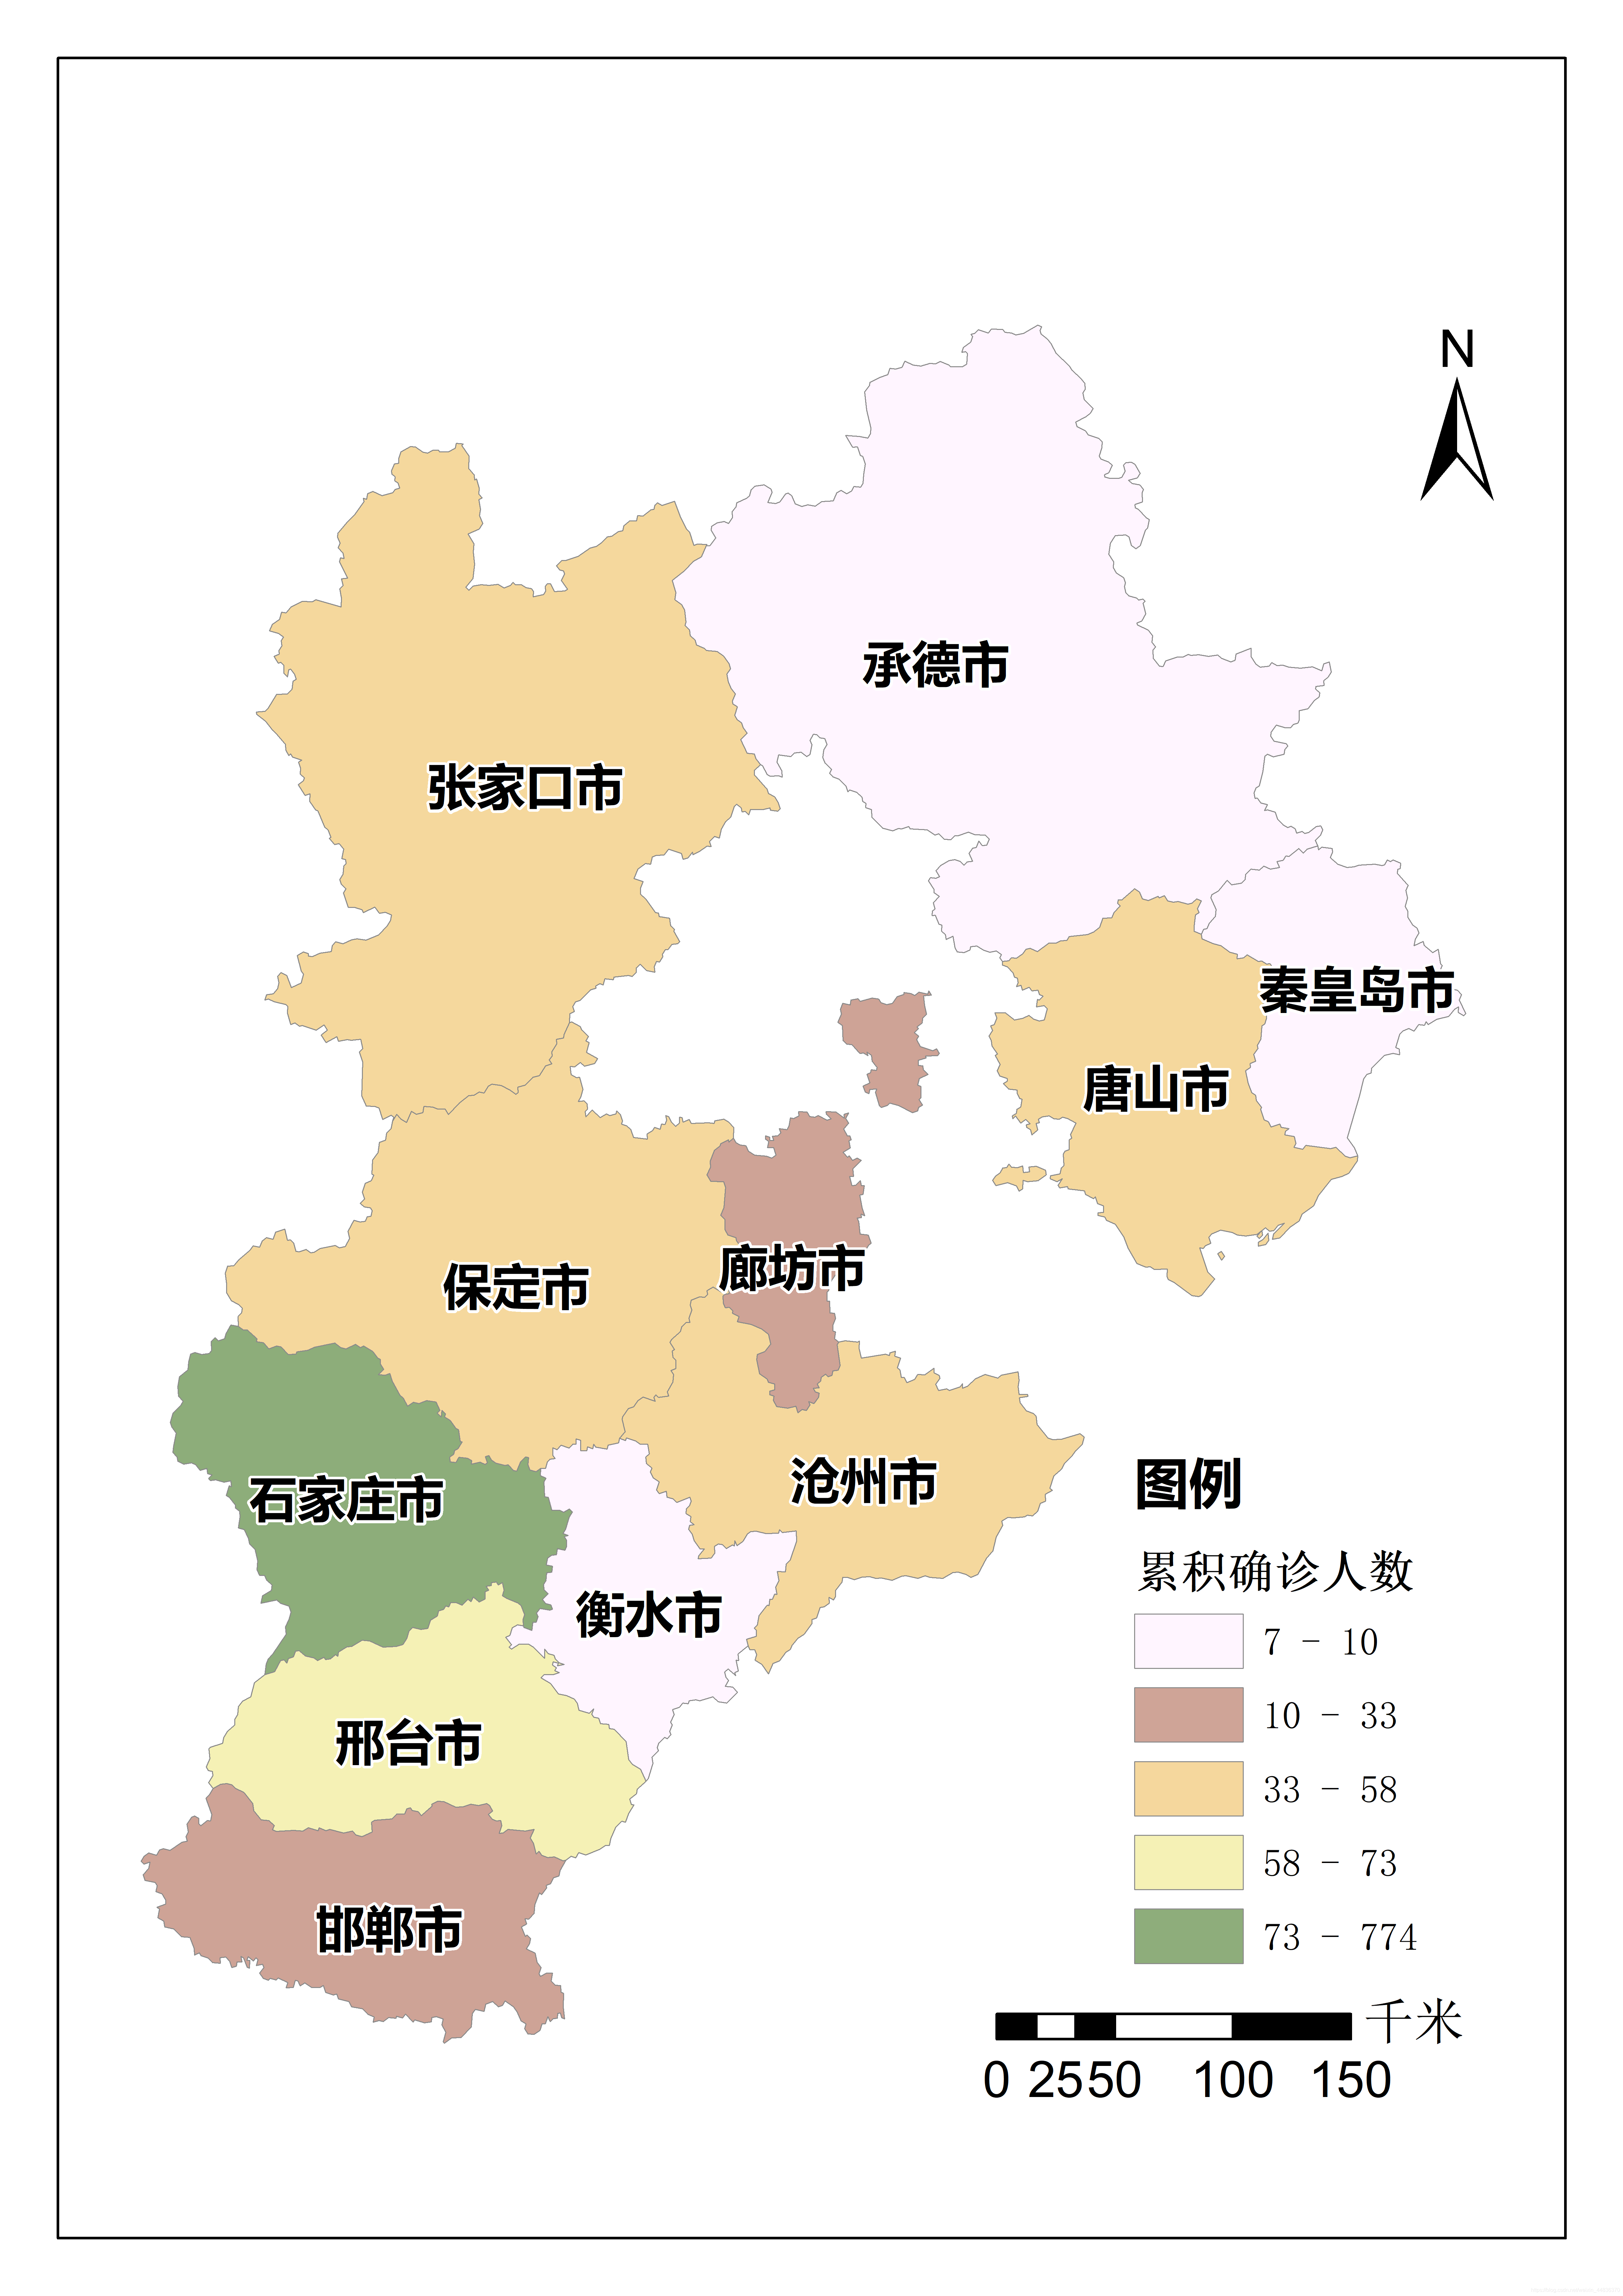 Distribution map of cumulative confirmed cases of COVID-19 in Hebei Province on January 18